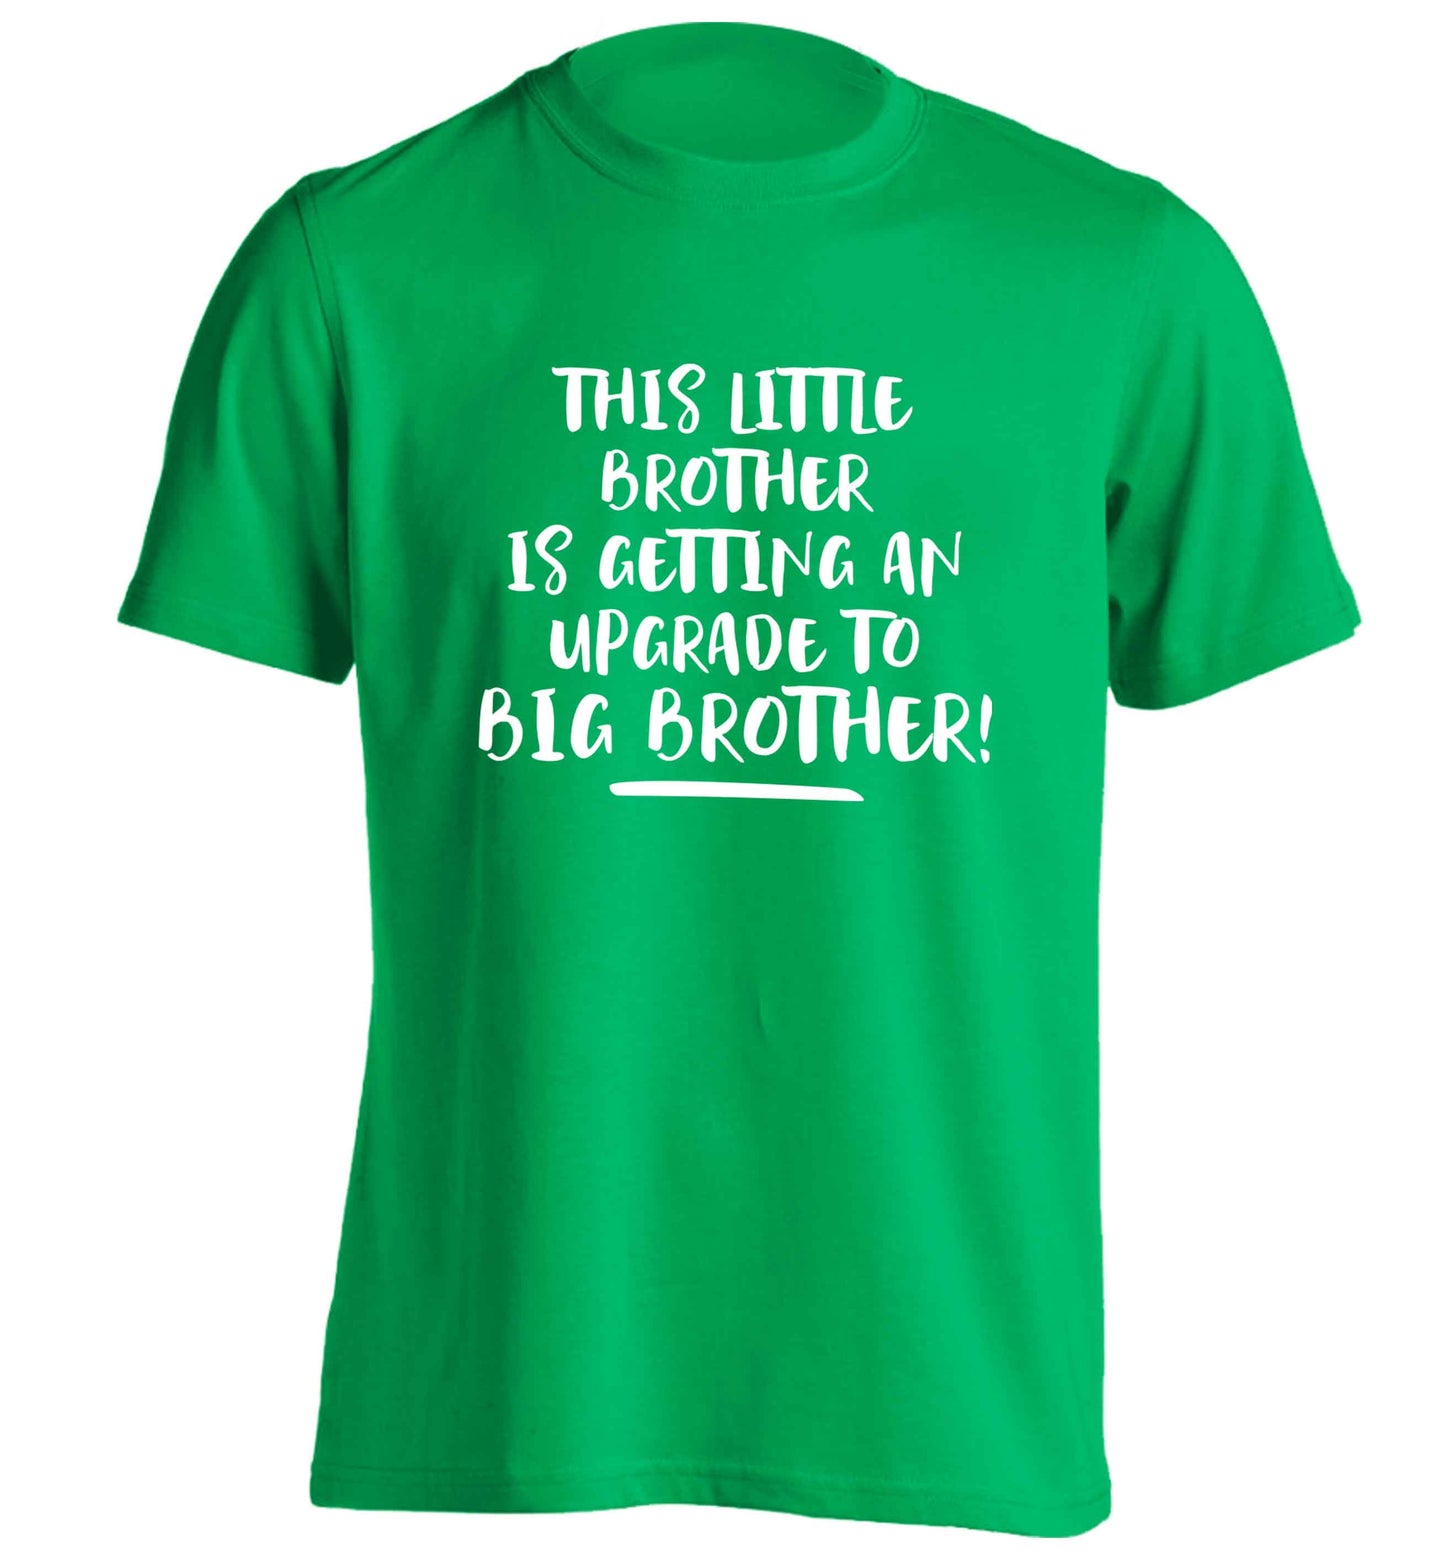 This little brother is getting an upgrade to big brother! adults unisex green Tshirt 2XL